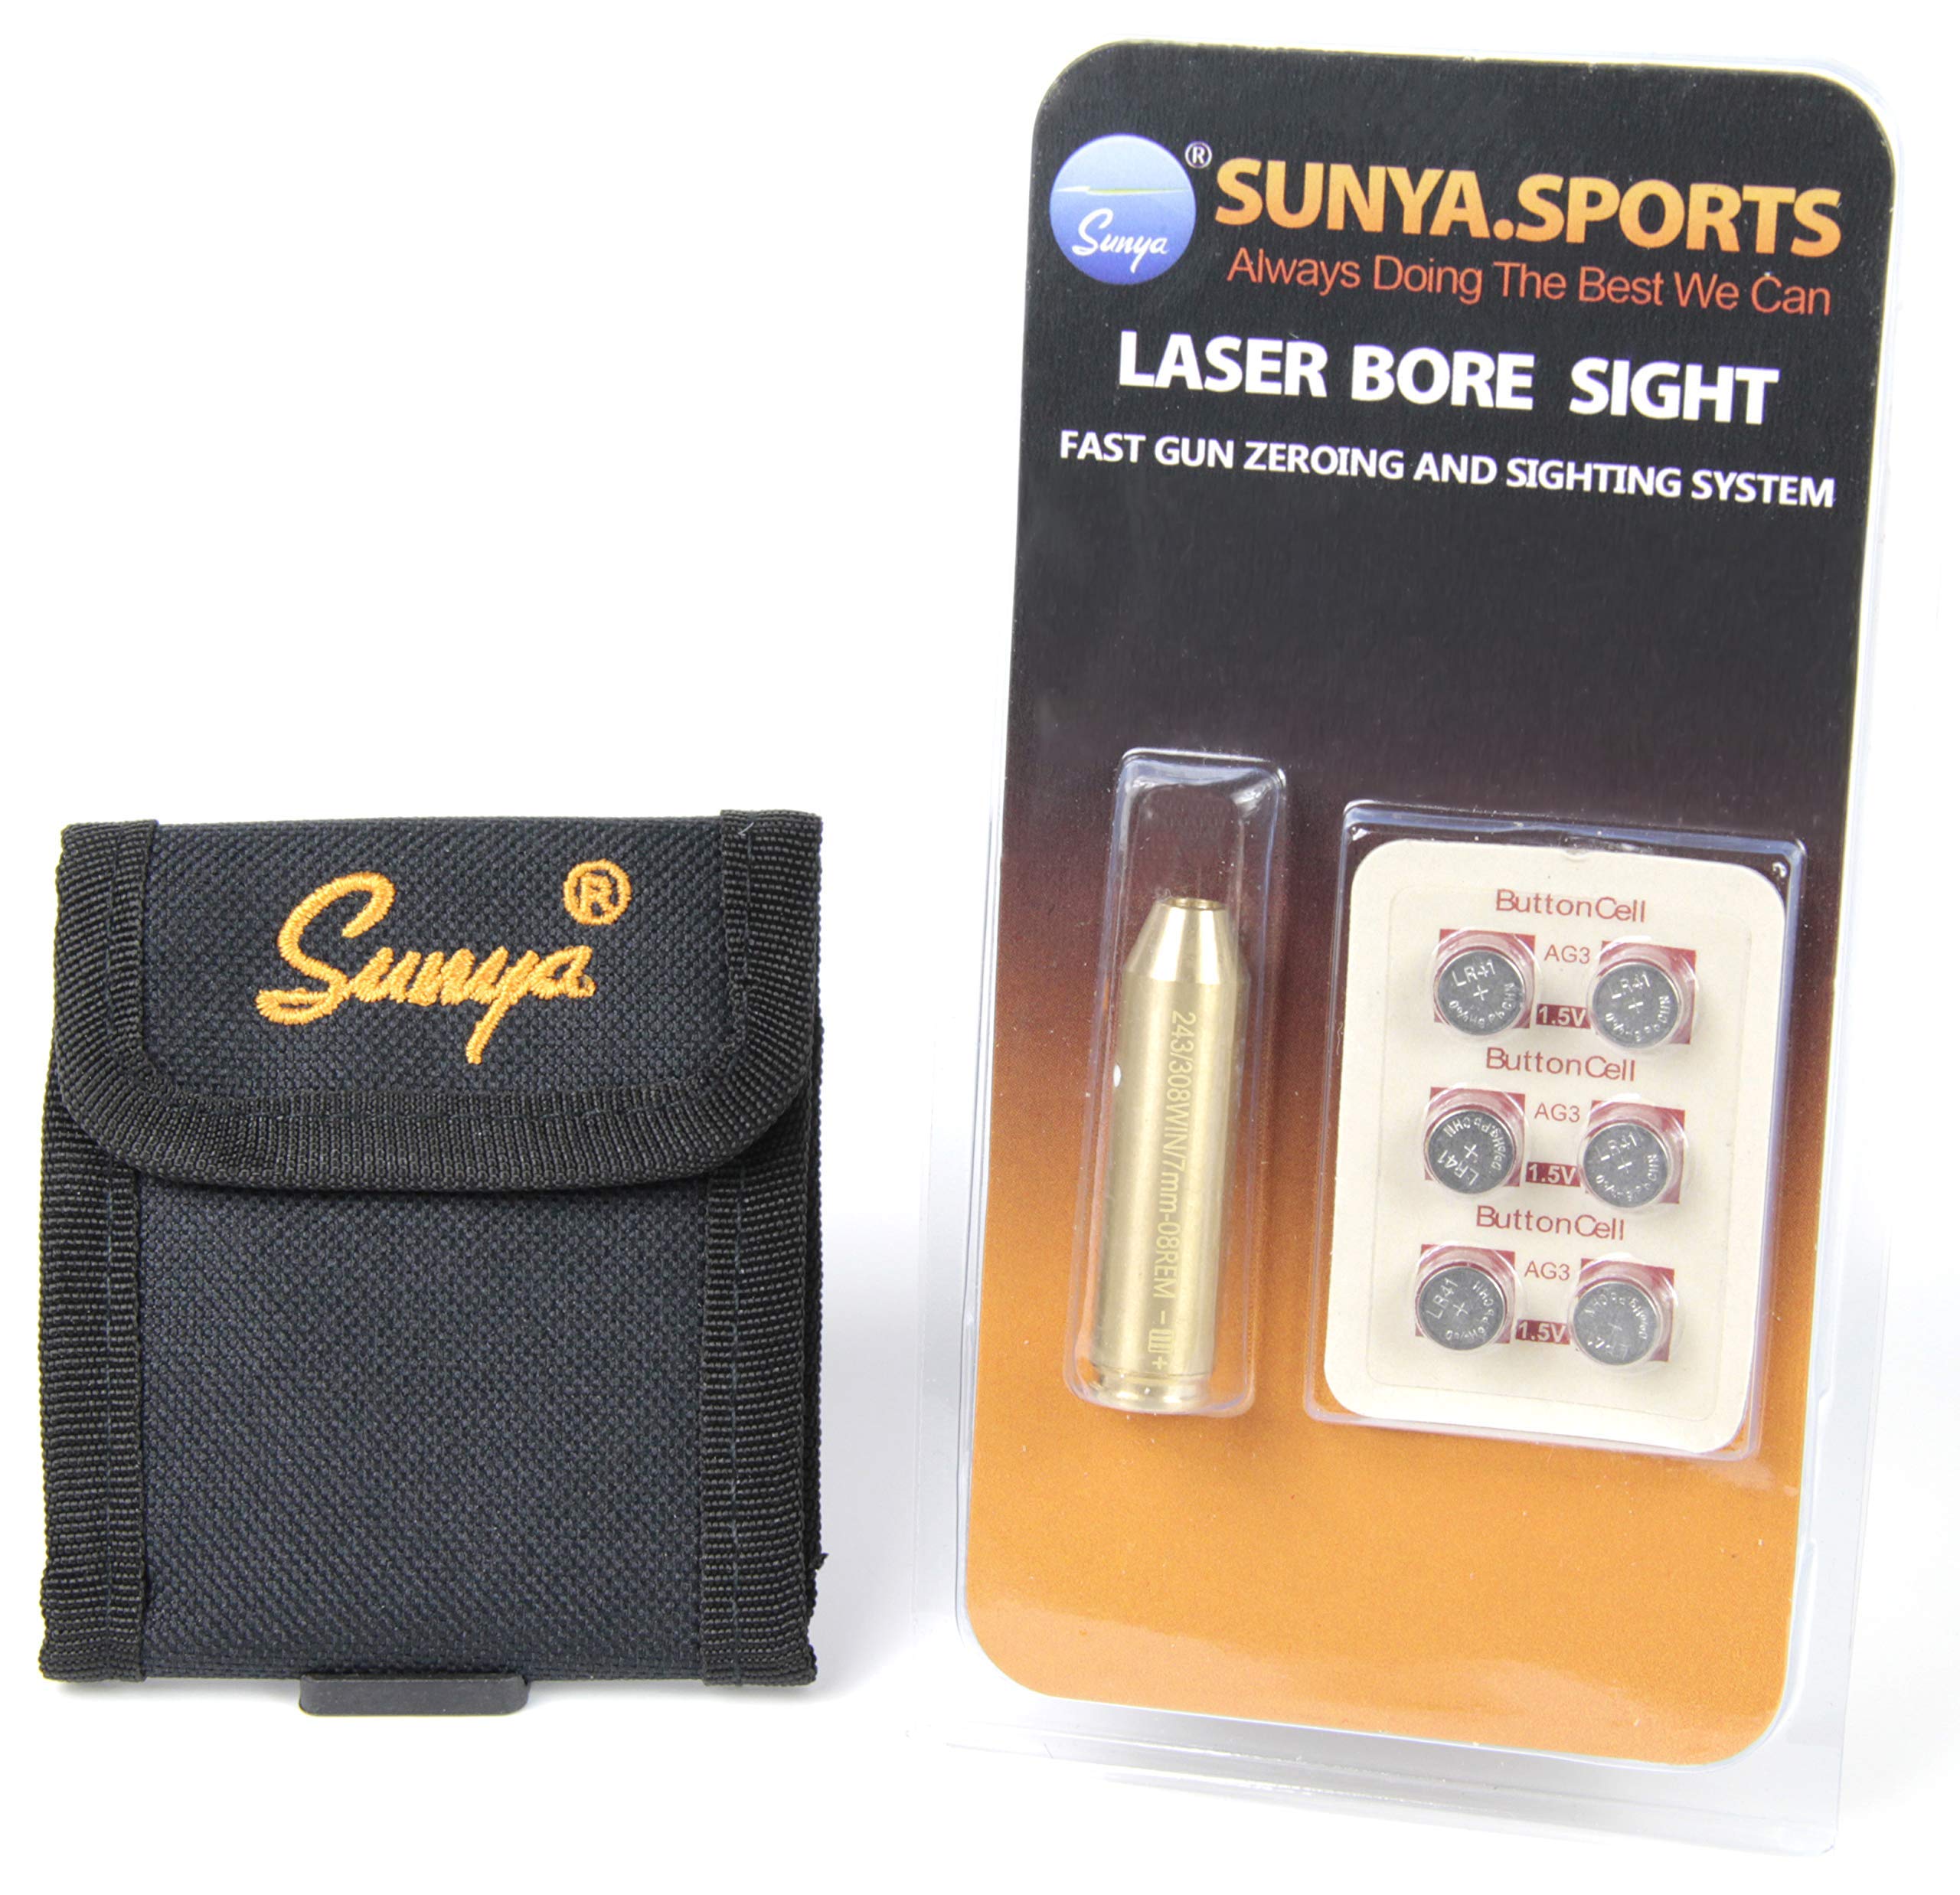 Sunya 308 Bore Sight Laser, Boresighter Fit .243 / .308win / 7mm-08 with Carrying Pouch, Includes 4 Sets Battery for Scope zeroi